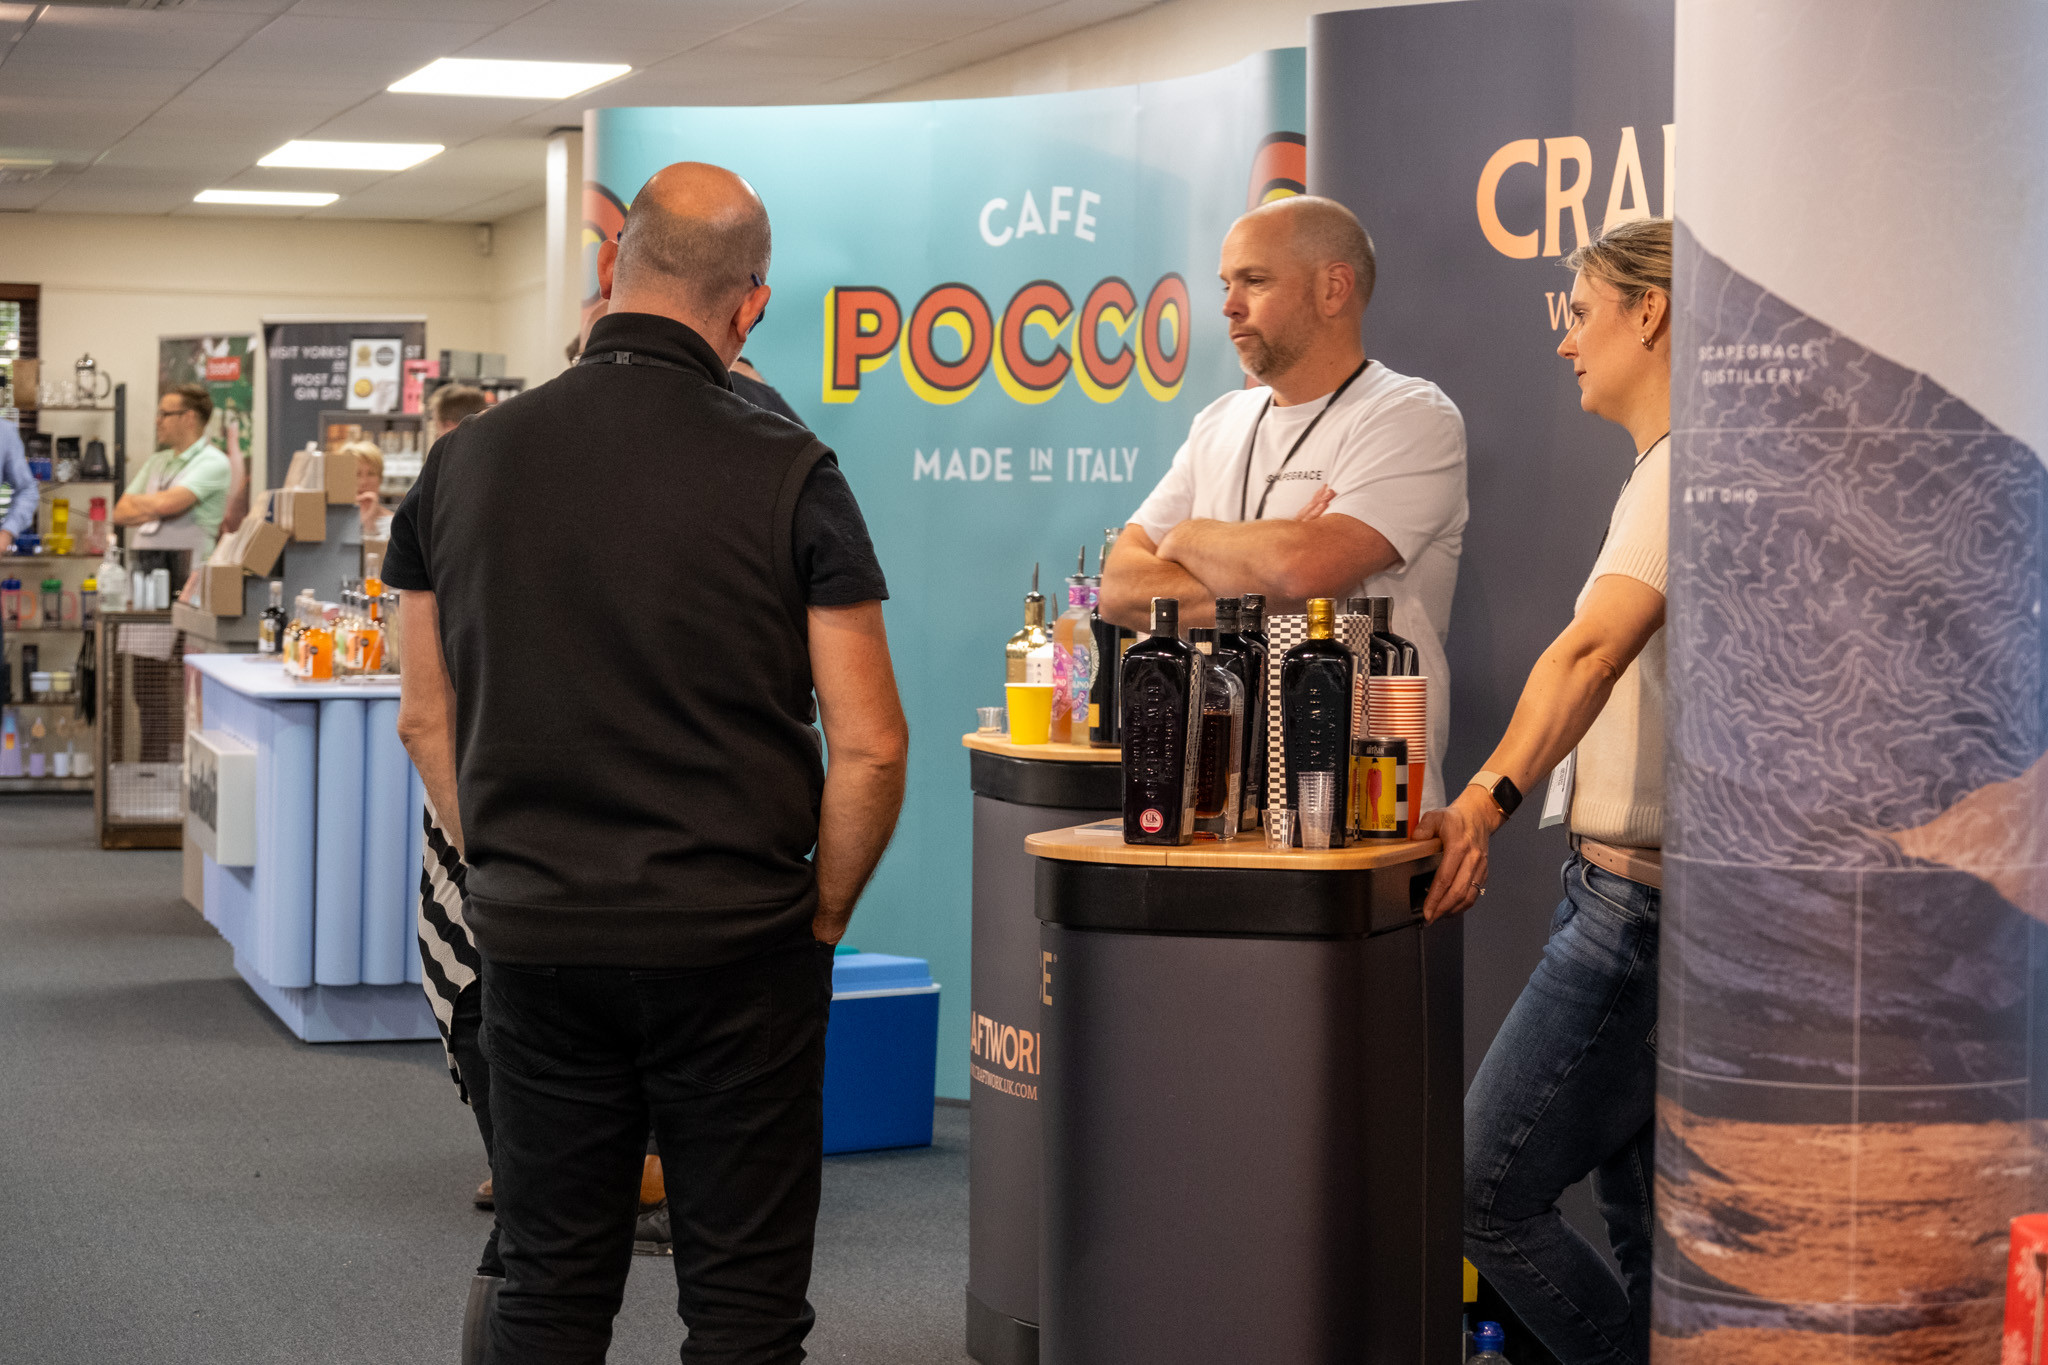 craftwork alcohol on show at a trade show hosted at cranmore park